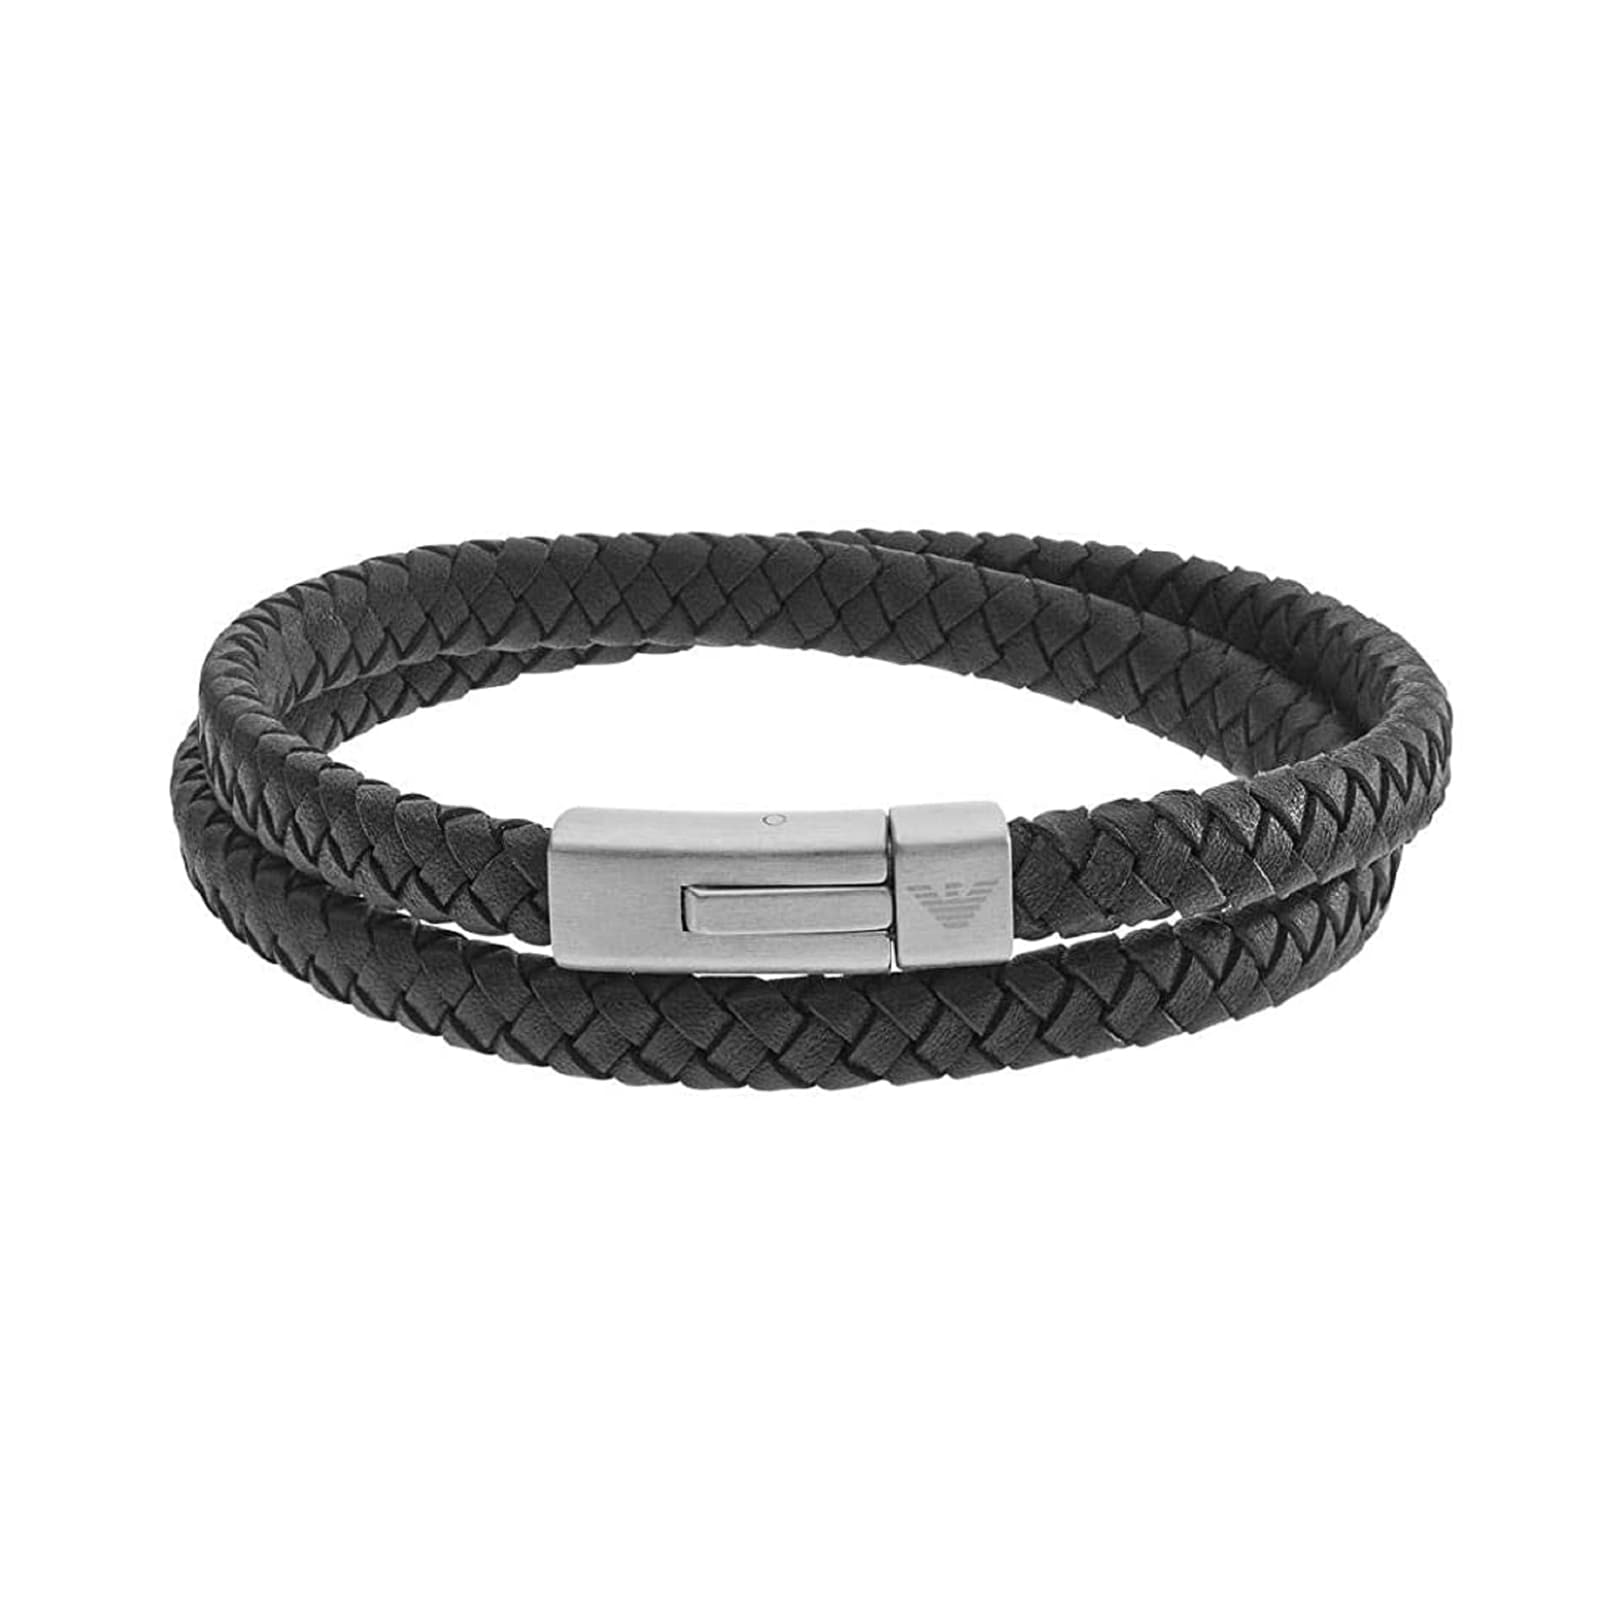 Mens Double Black Leather and Steel Woven Bracelet